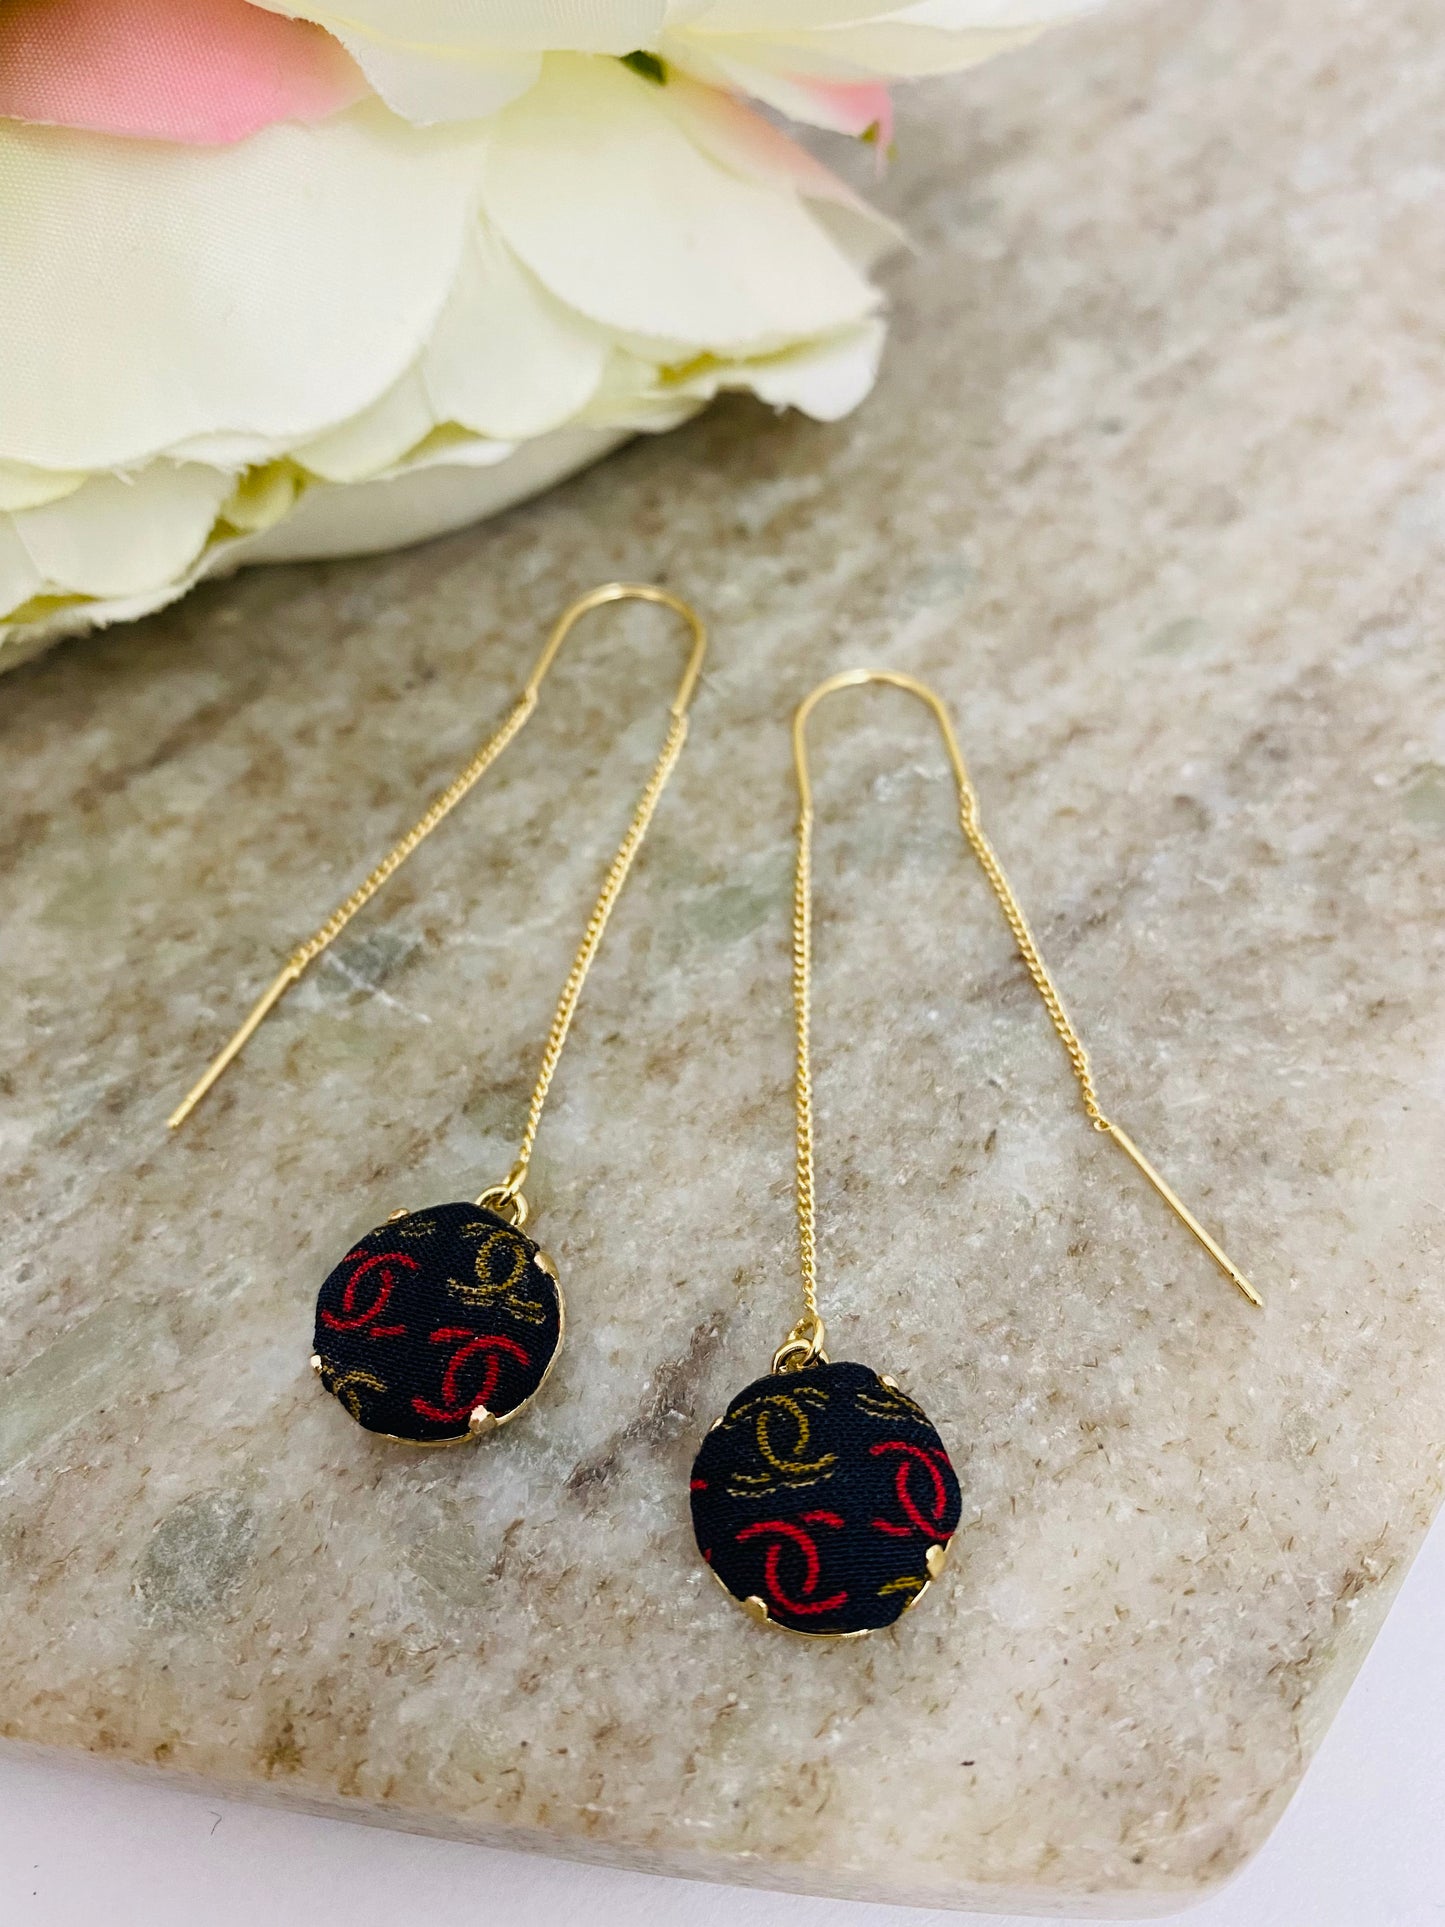 CC-Black with Bison & Cardinal CC logo- CC047- earring collection